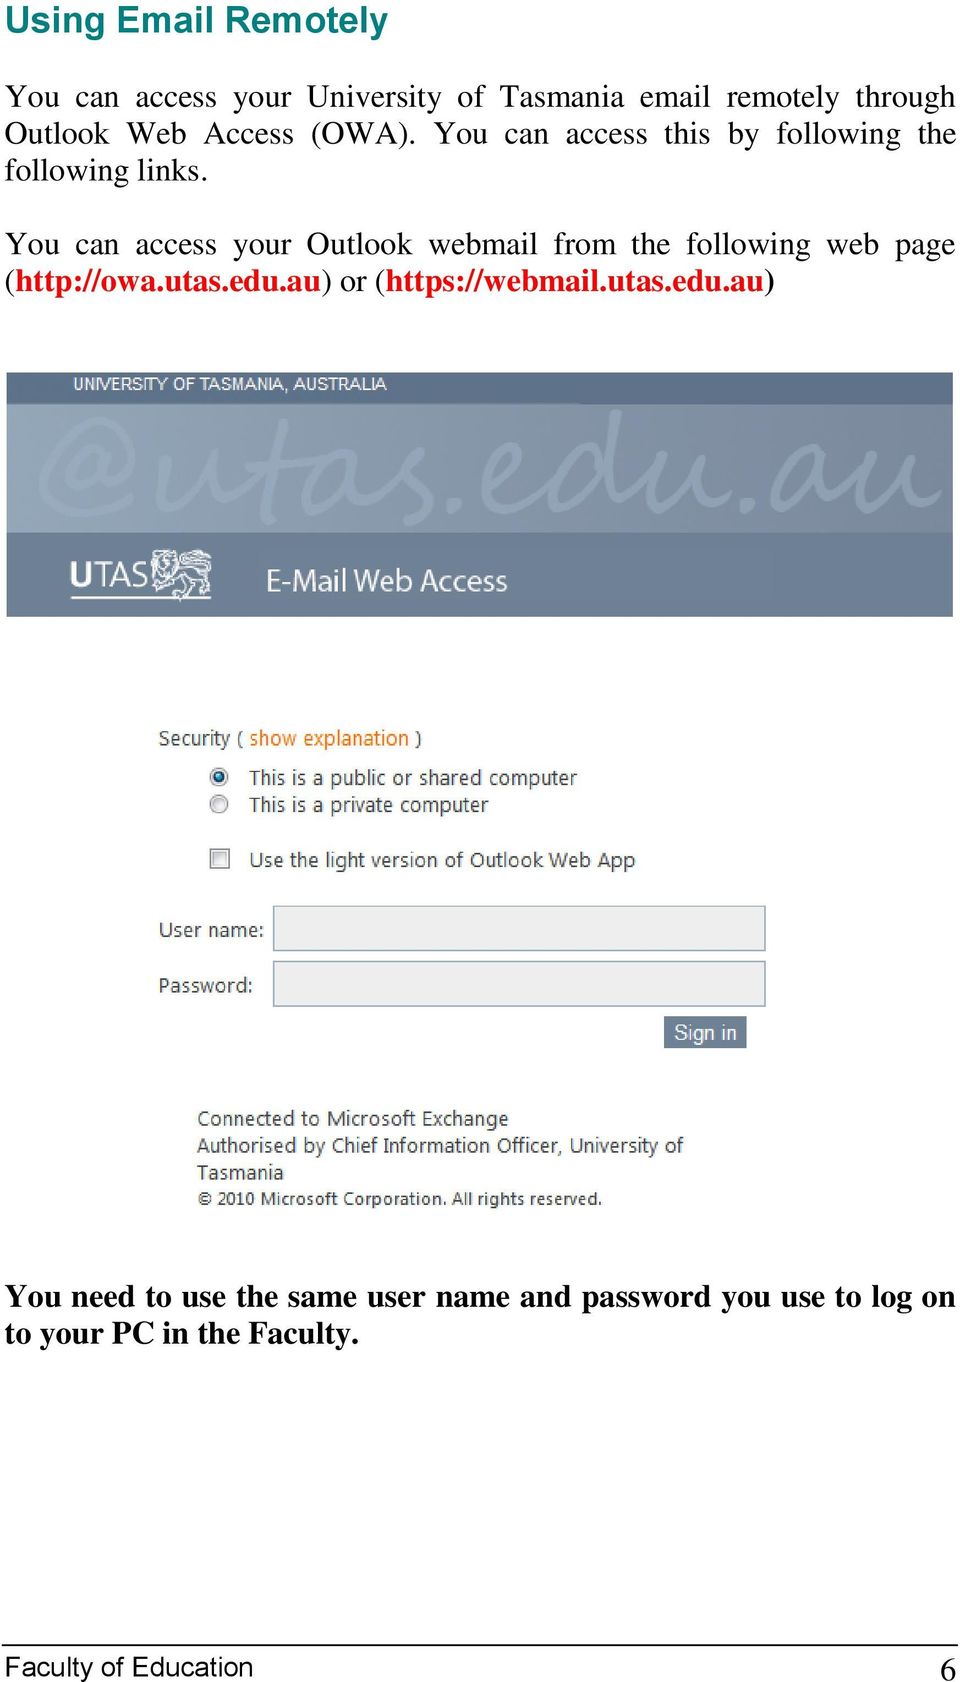 You can access your Outlook webmail from the following web page (http://owa.utas.edu.